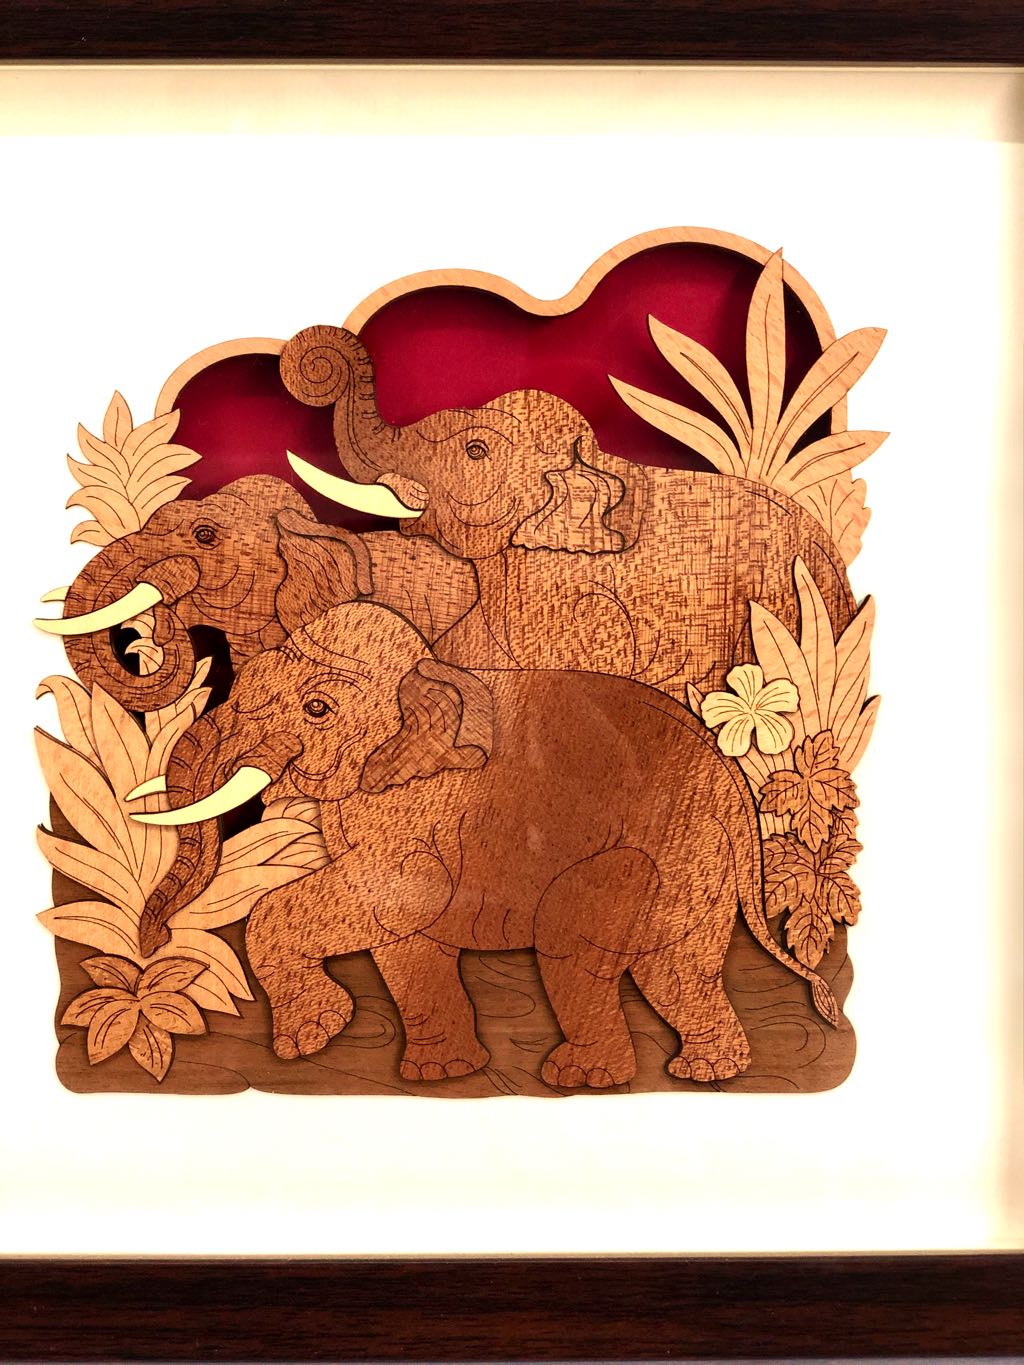 Unique Creation Of Elephant On Wood Unusual Expertise Crafts Frames By Tamrapatra